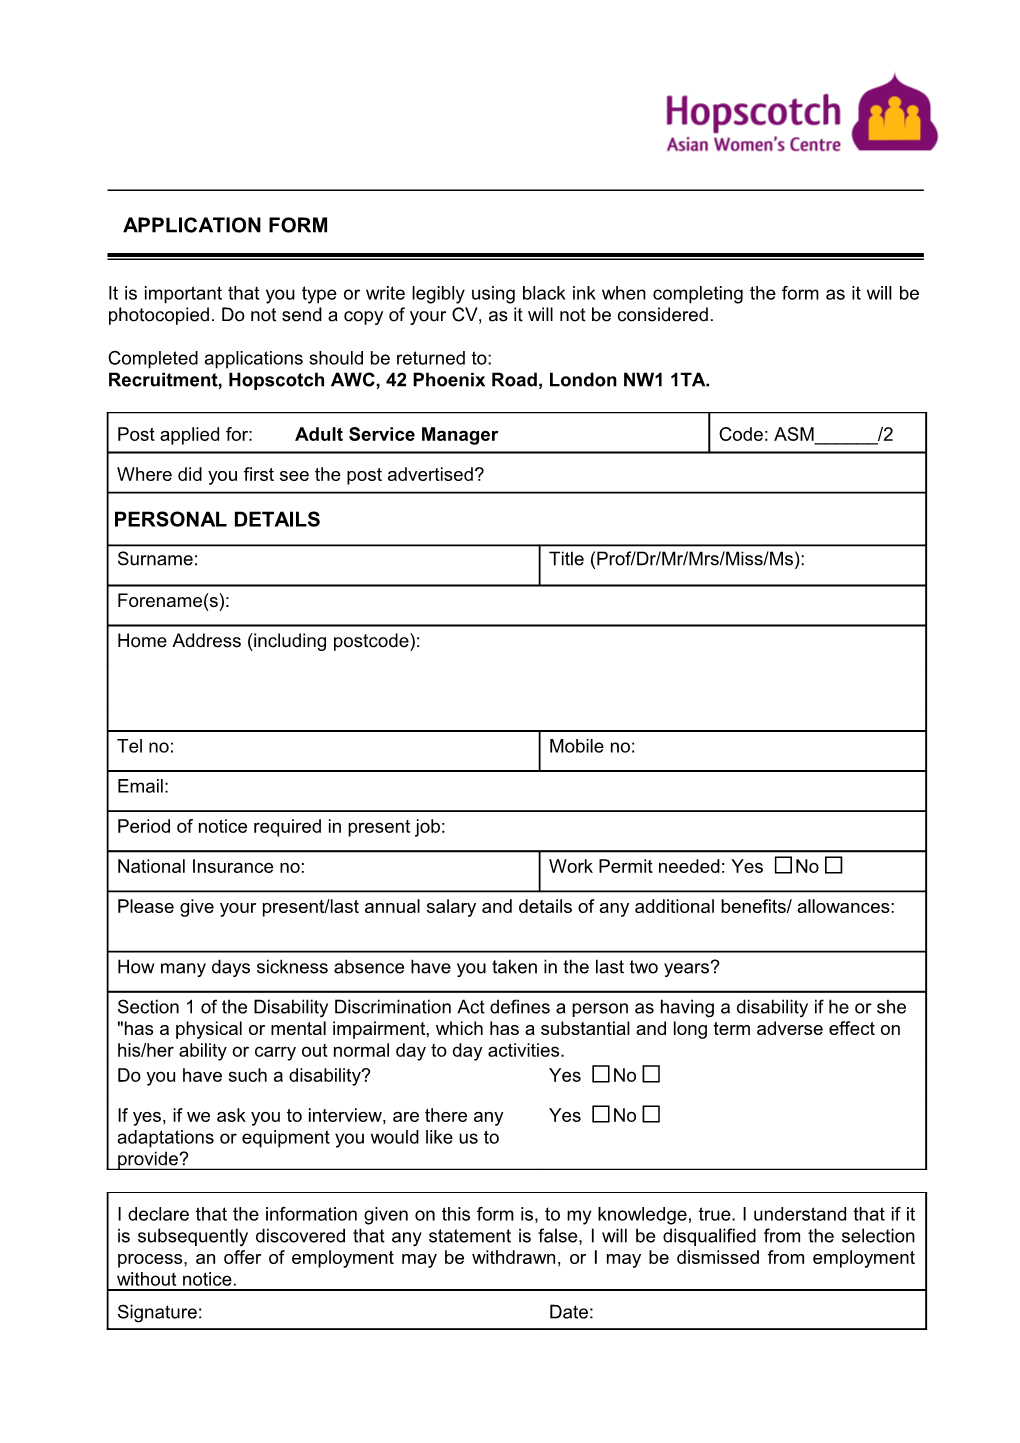 Application Form s88